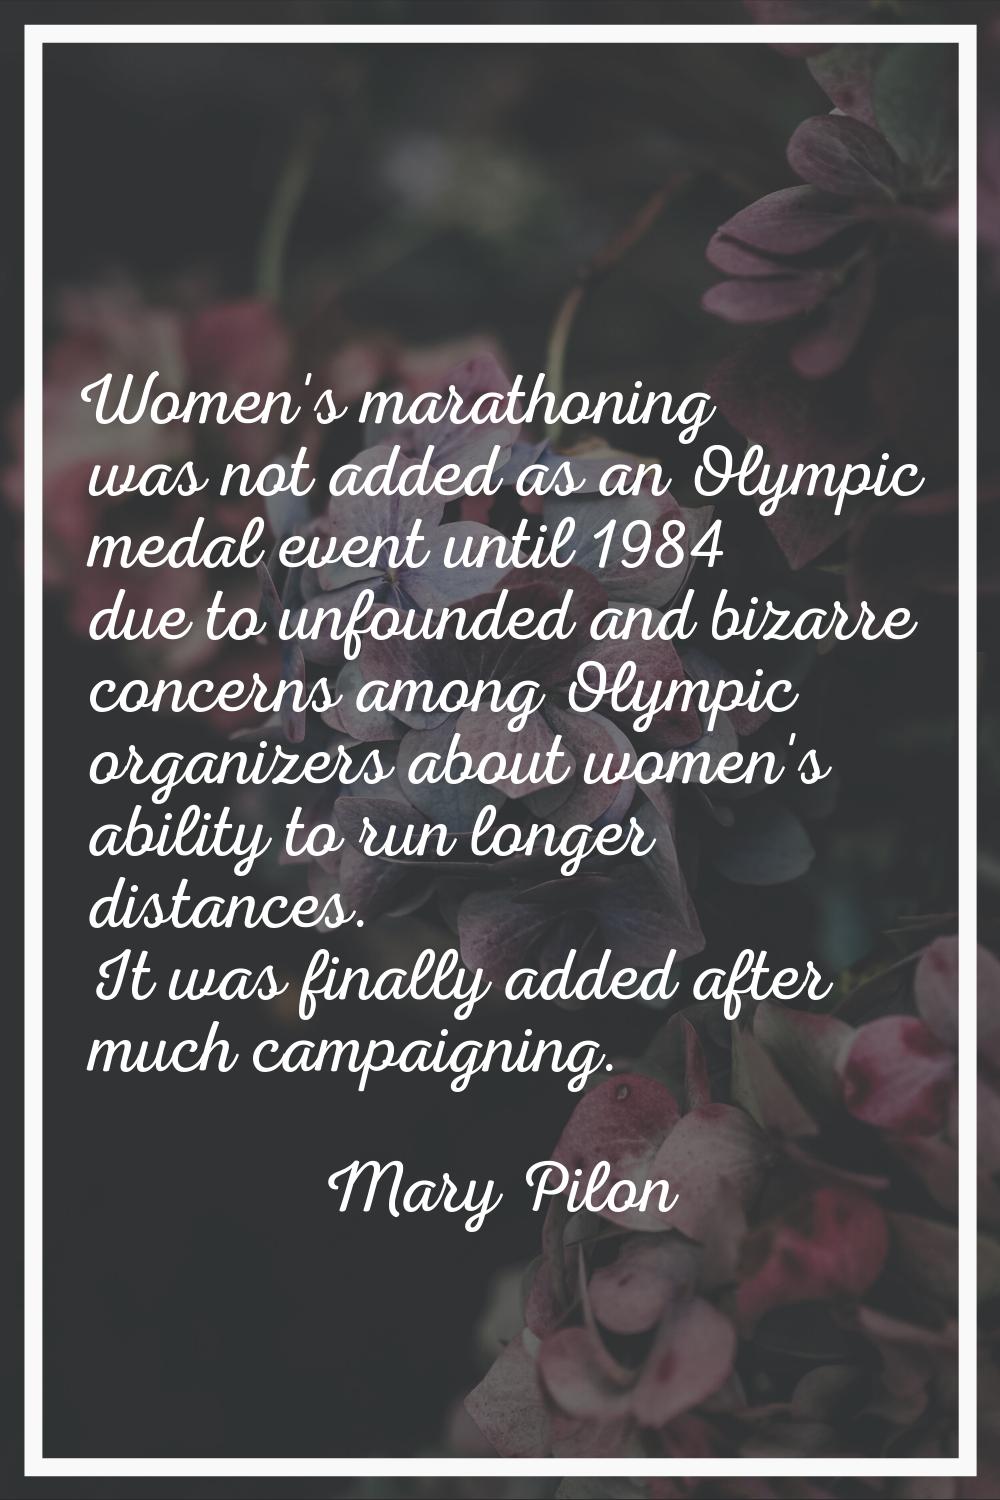 Women's marathoning was not added as an Olympic medal event until 1984 due to unfounded and bizarre